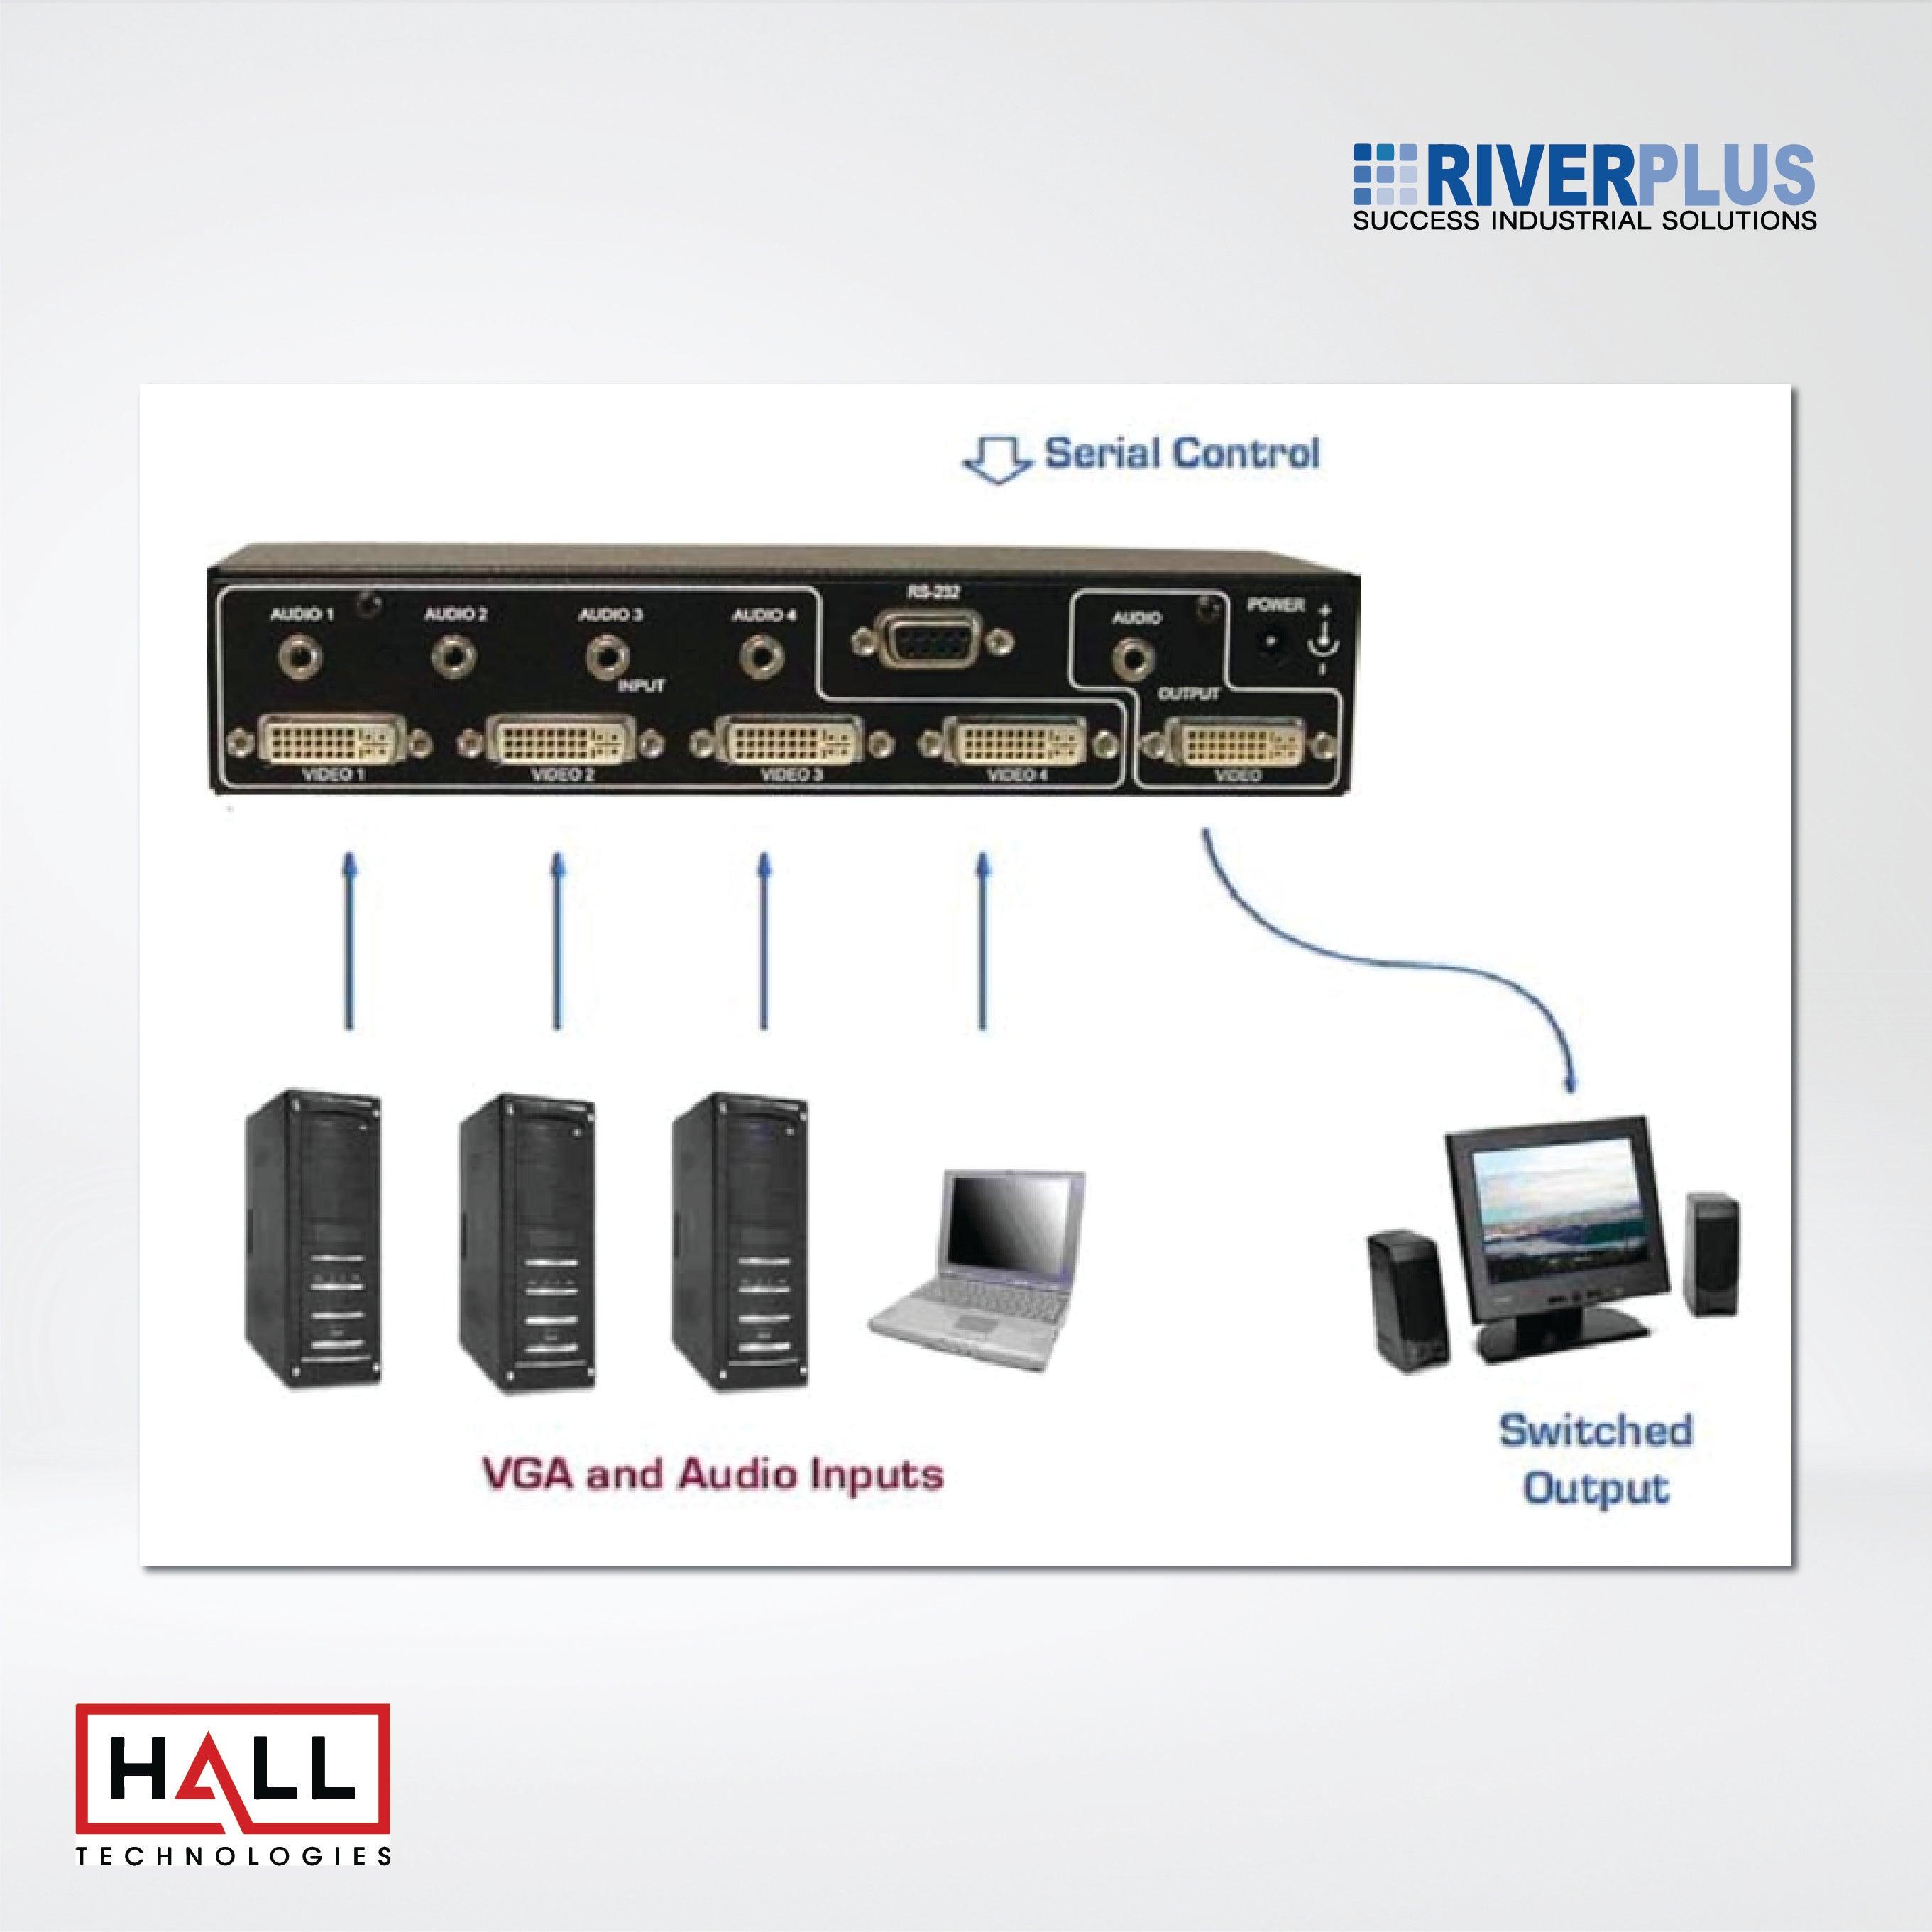 DVS-4A 4-Port DVI Switch with Audio, Serial Control & Long Cable Equalization - Riverplus